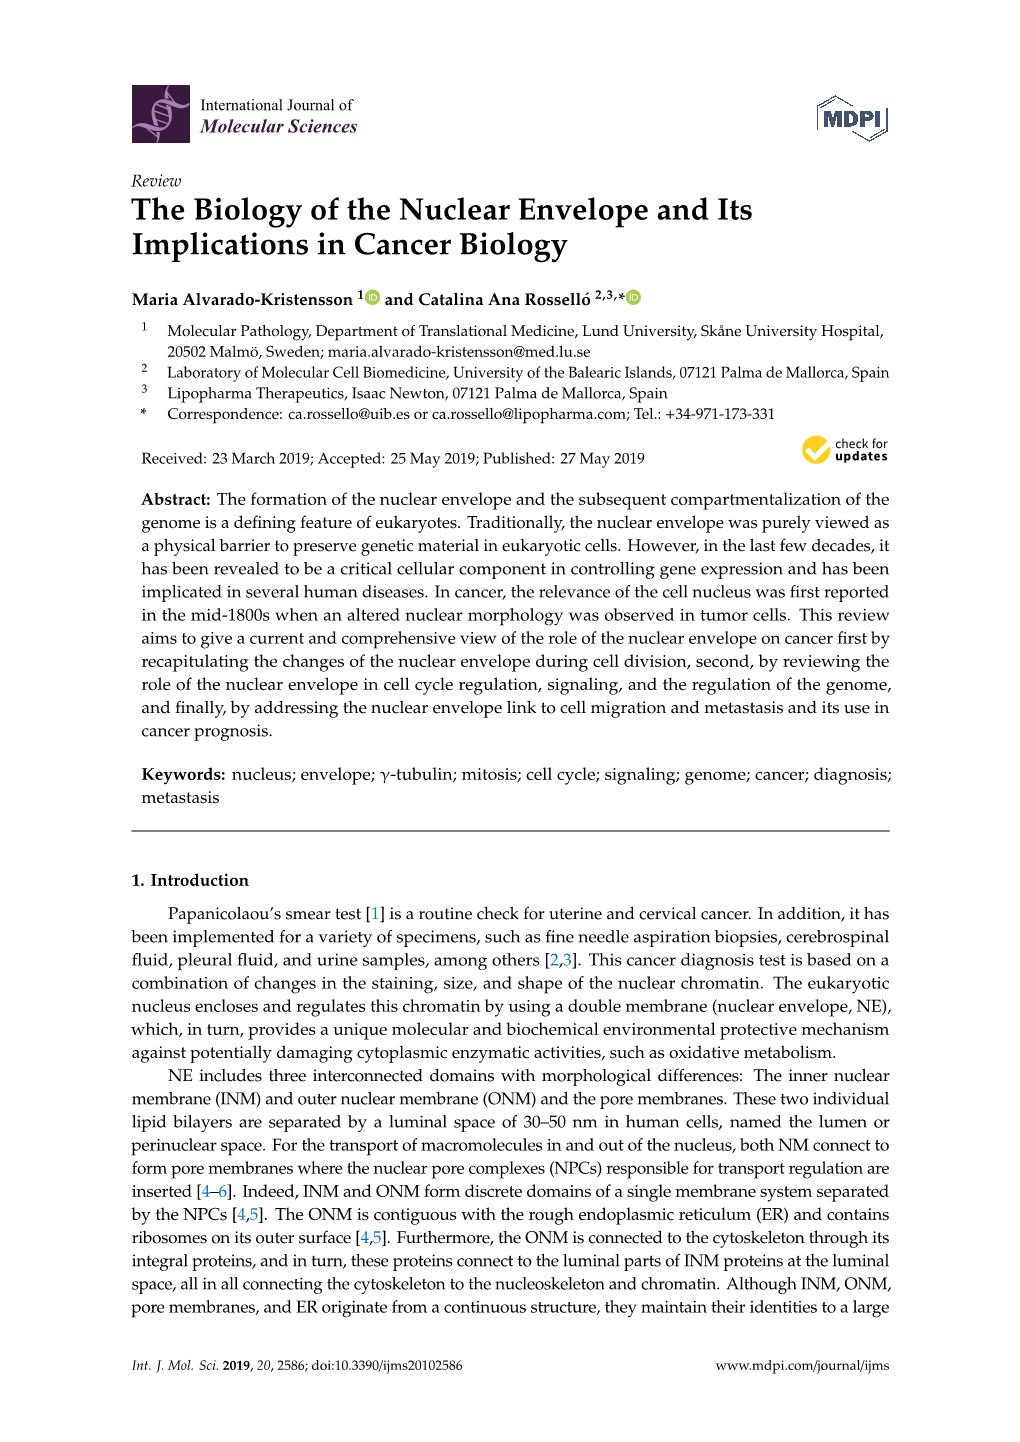 The Biology of the Nuclear Envelope and Its Implications in Cancer Biology